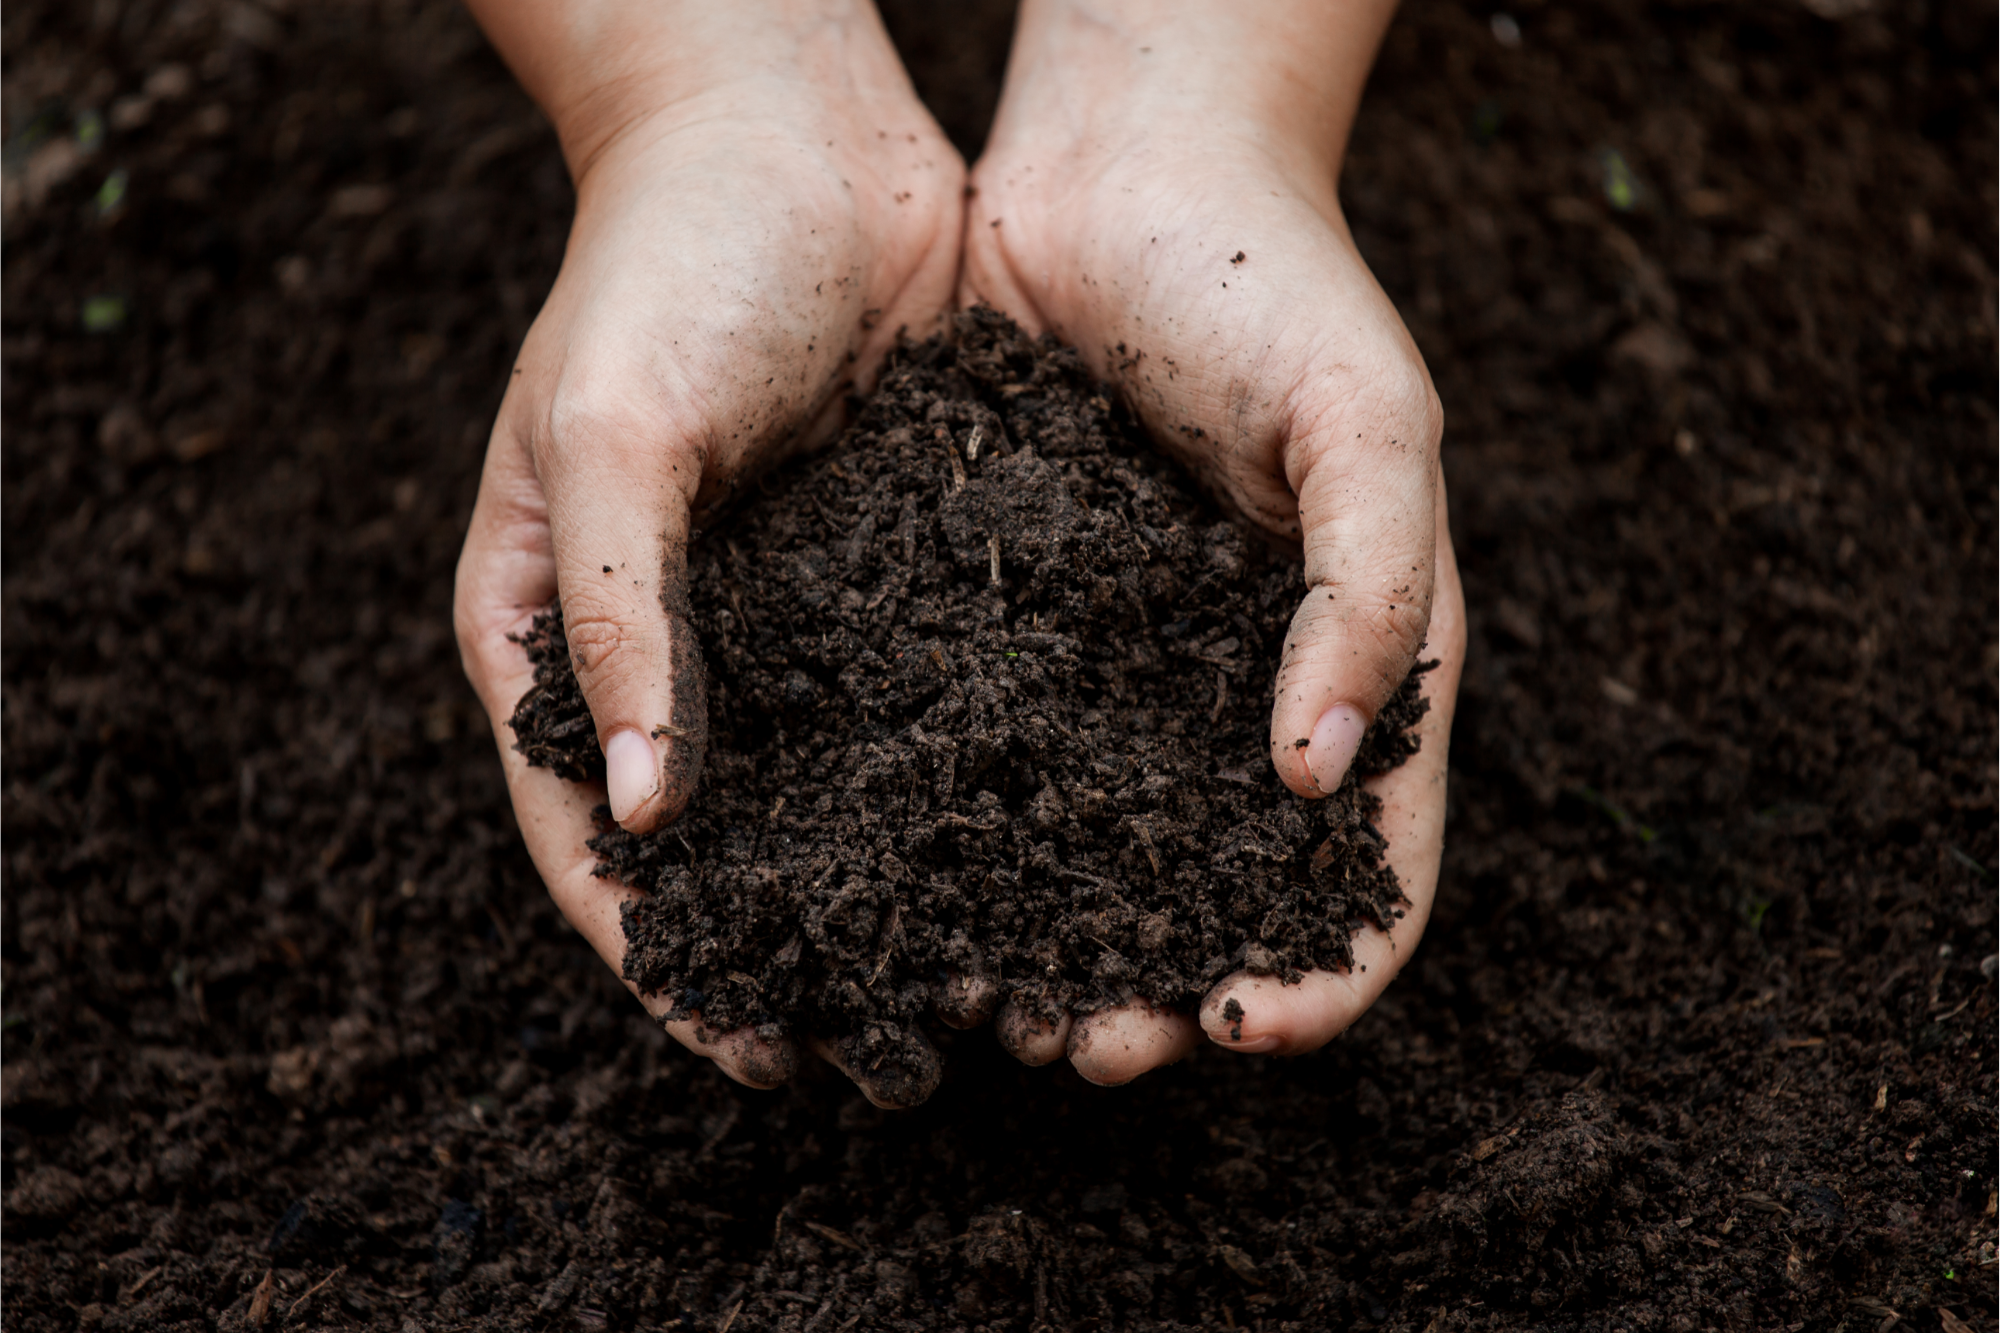 A picture of some hands scooping up fresh soil